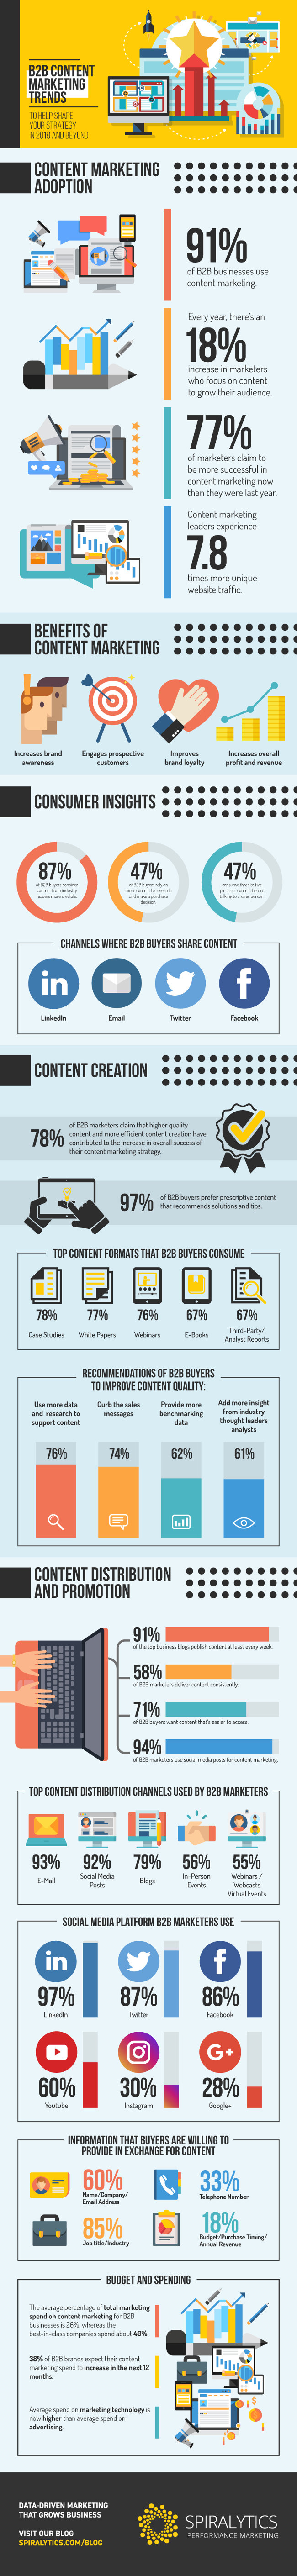 Key B2B Content Marketing Trends You Need to Know [Infographic]